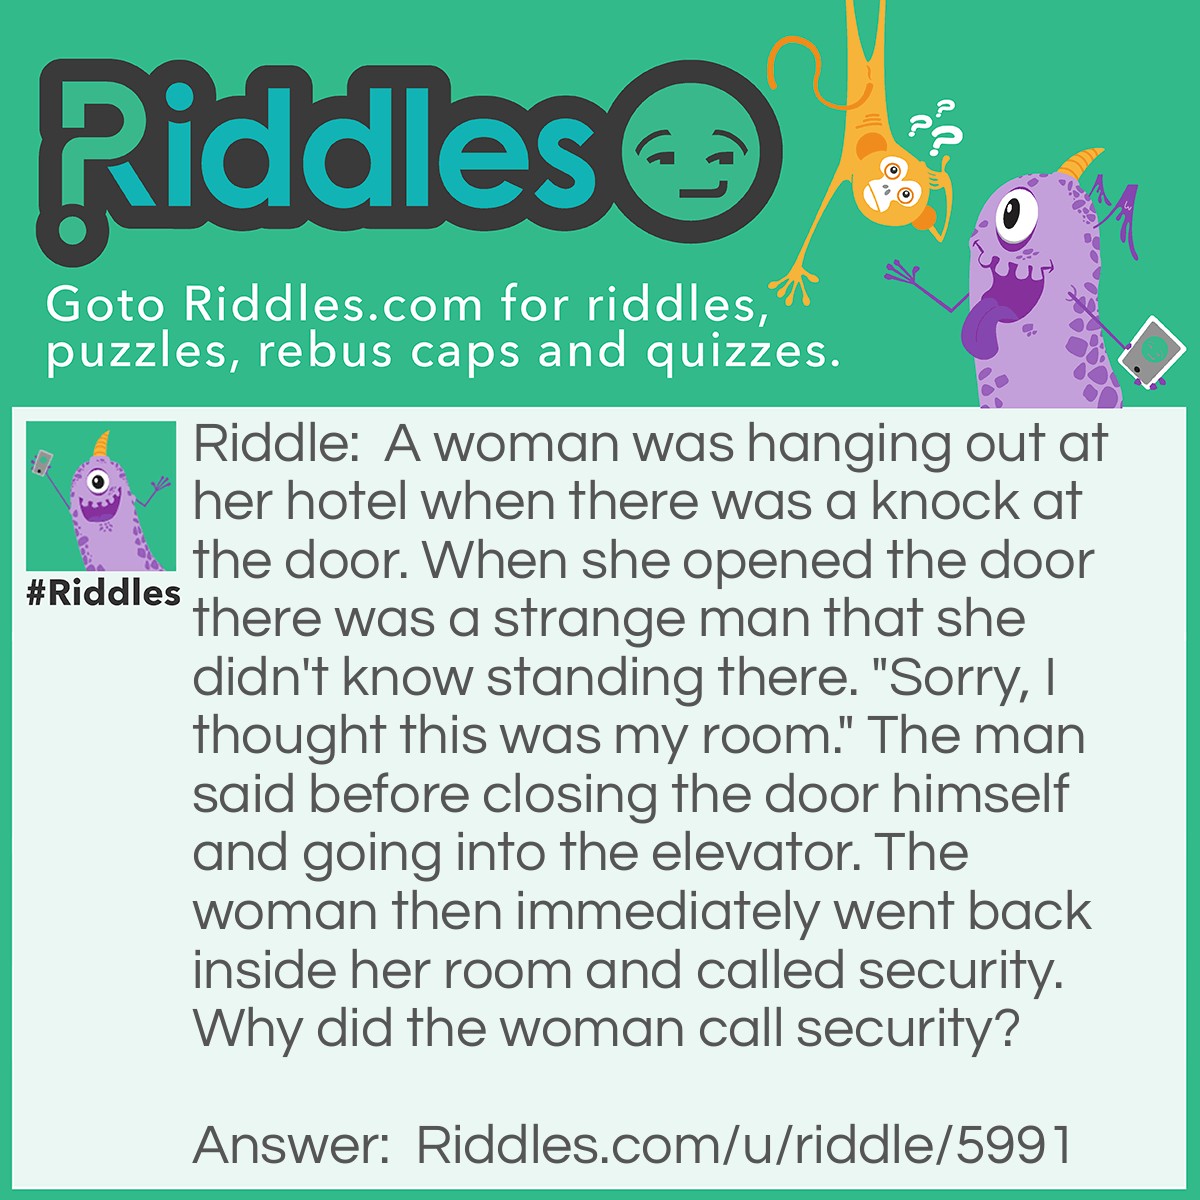 Riddle: A woman was hanging out at her hotel when there was a knock at the door. When she opened the door there was a strange man that she didn't know standing there. "Sorry, I thought this was my room." The man said before closing the door himself and going into the elevator. The woman then immediately went back inside her room and called security. Why did the woman call security? Answer: Who knocks on their OWN hotel door? If it was their own room they would just use their key.